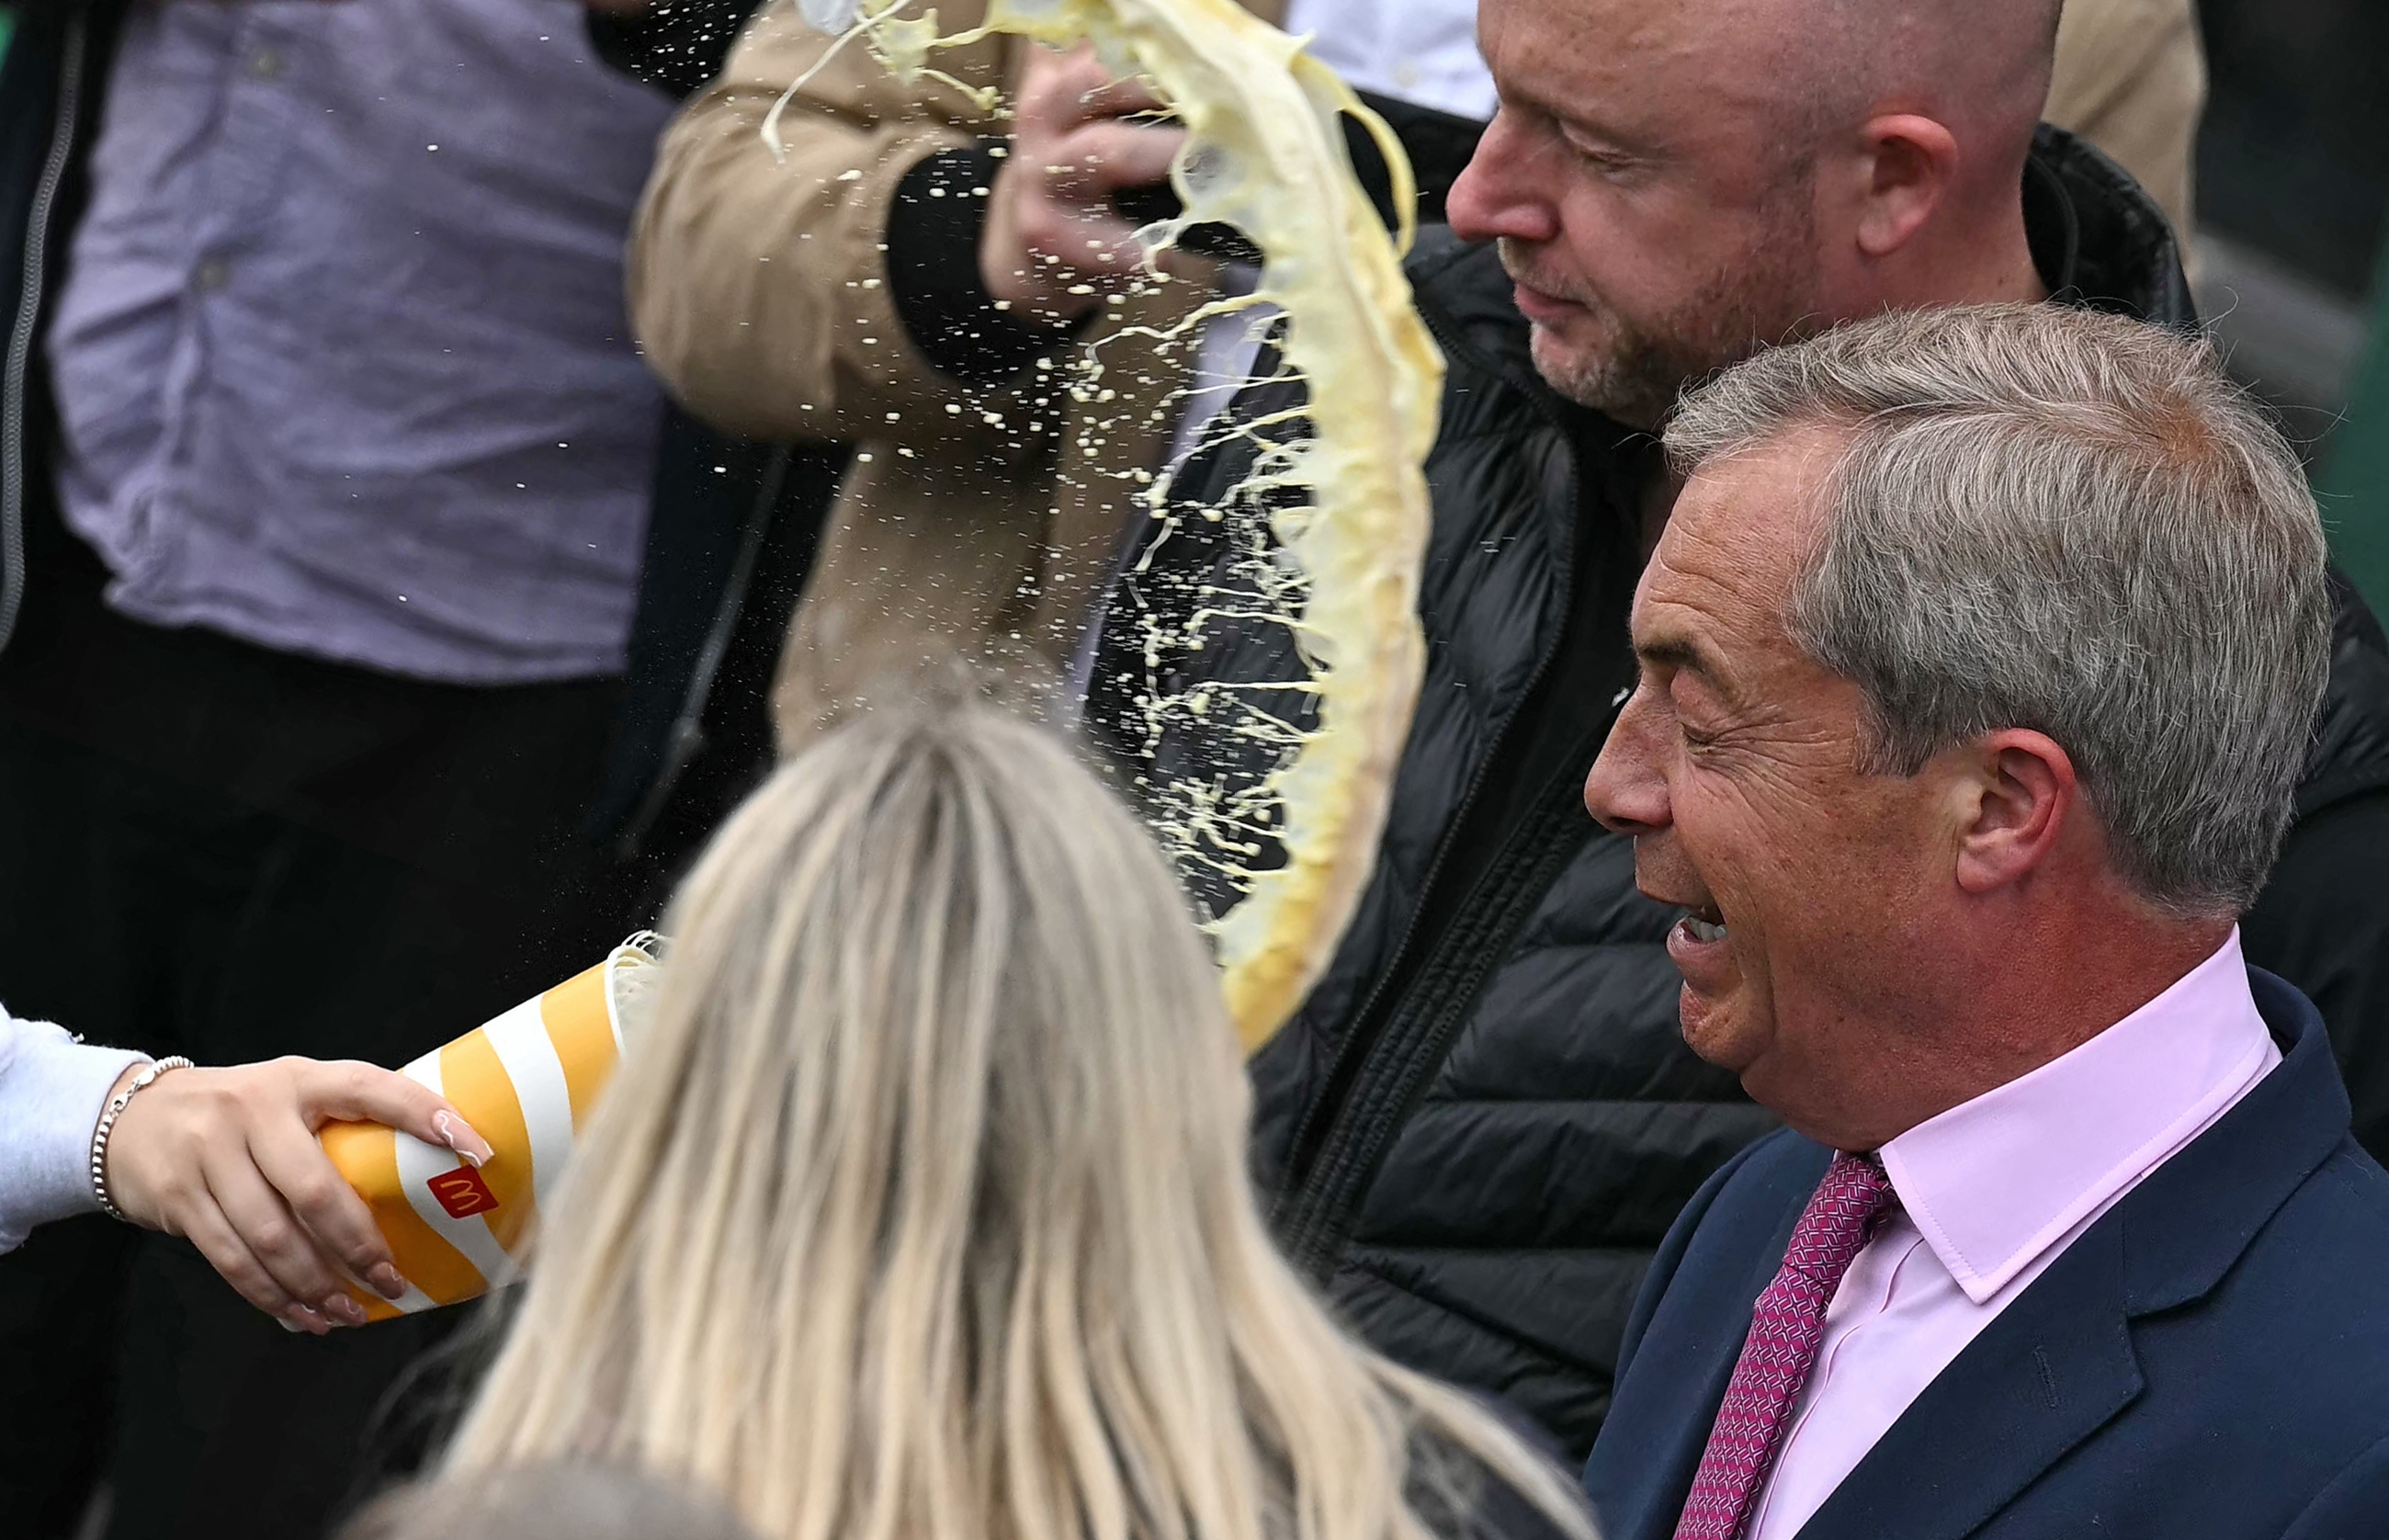 A milkshake is thrown at Nigel Farage after his campaign launch (AFP/Ben Stansall)